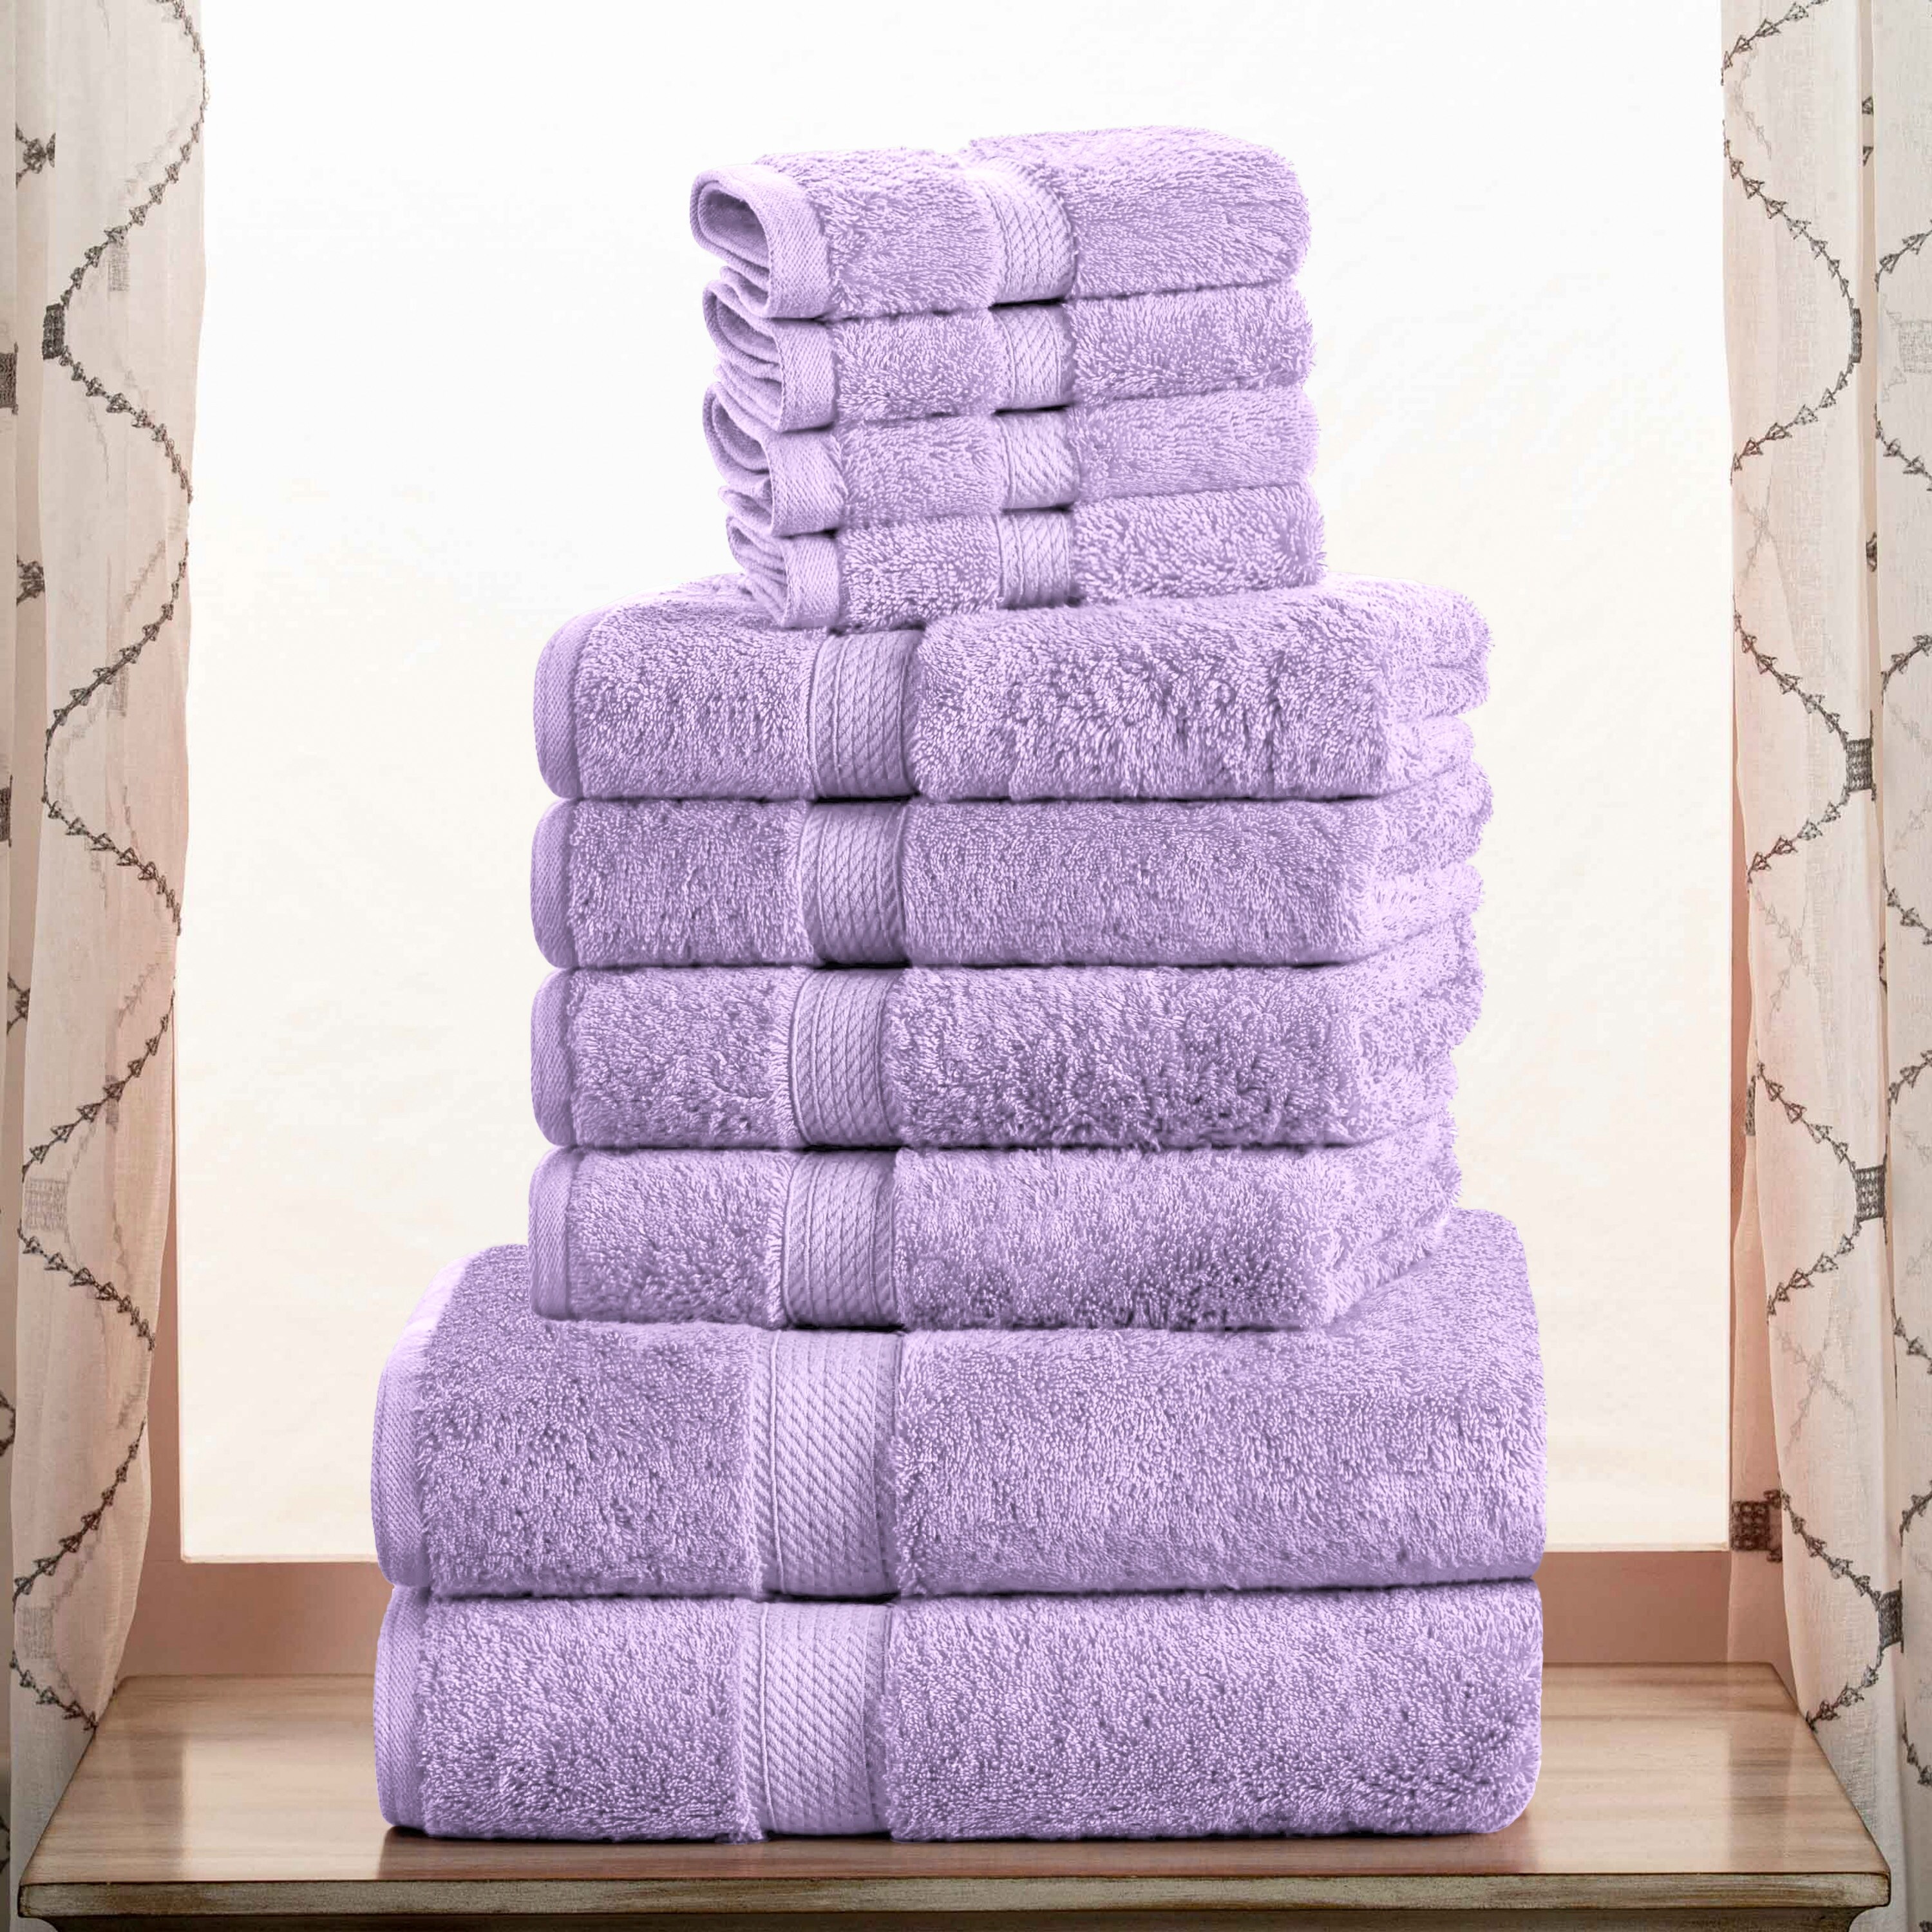 https://ak1.ostkcdn.com/images/products/is/images/direct/435838ab316abfba00bb36b0fd17089882a27578/Egyptian-Cotton-Heavyweight-Solid-Plush-Towel-Set-by-Superior.jpg